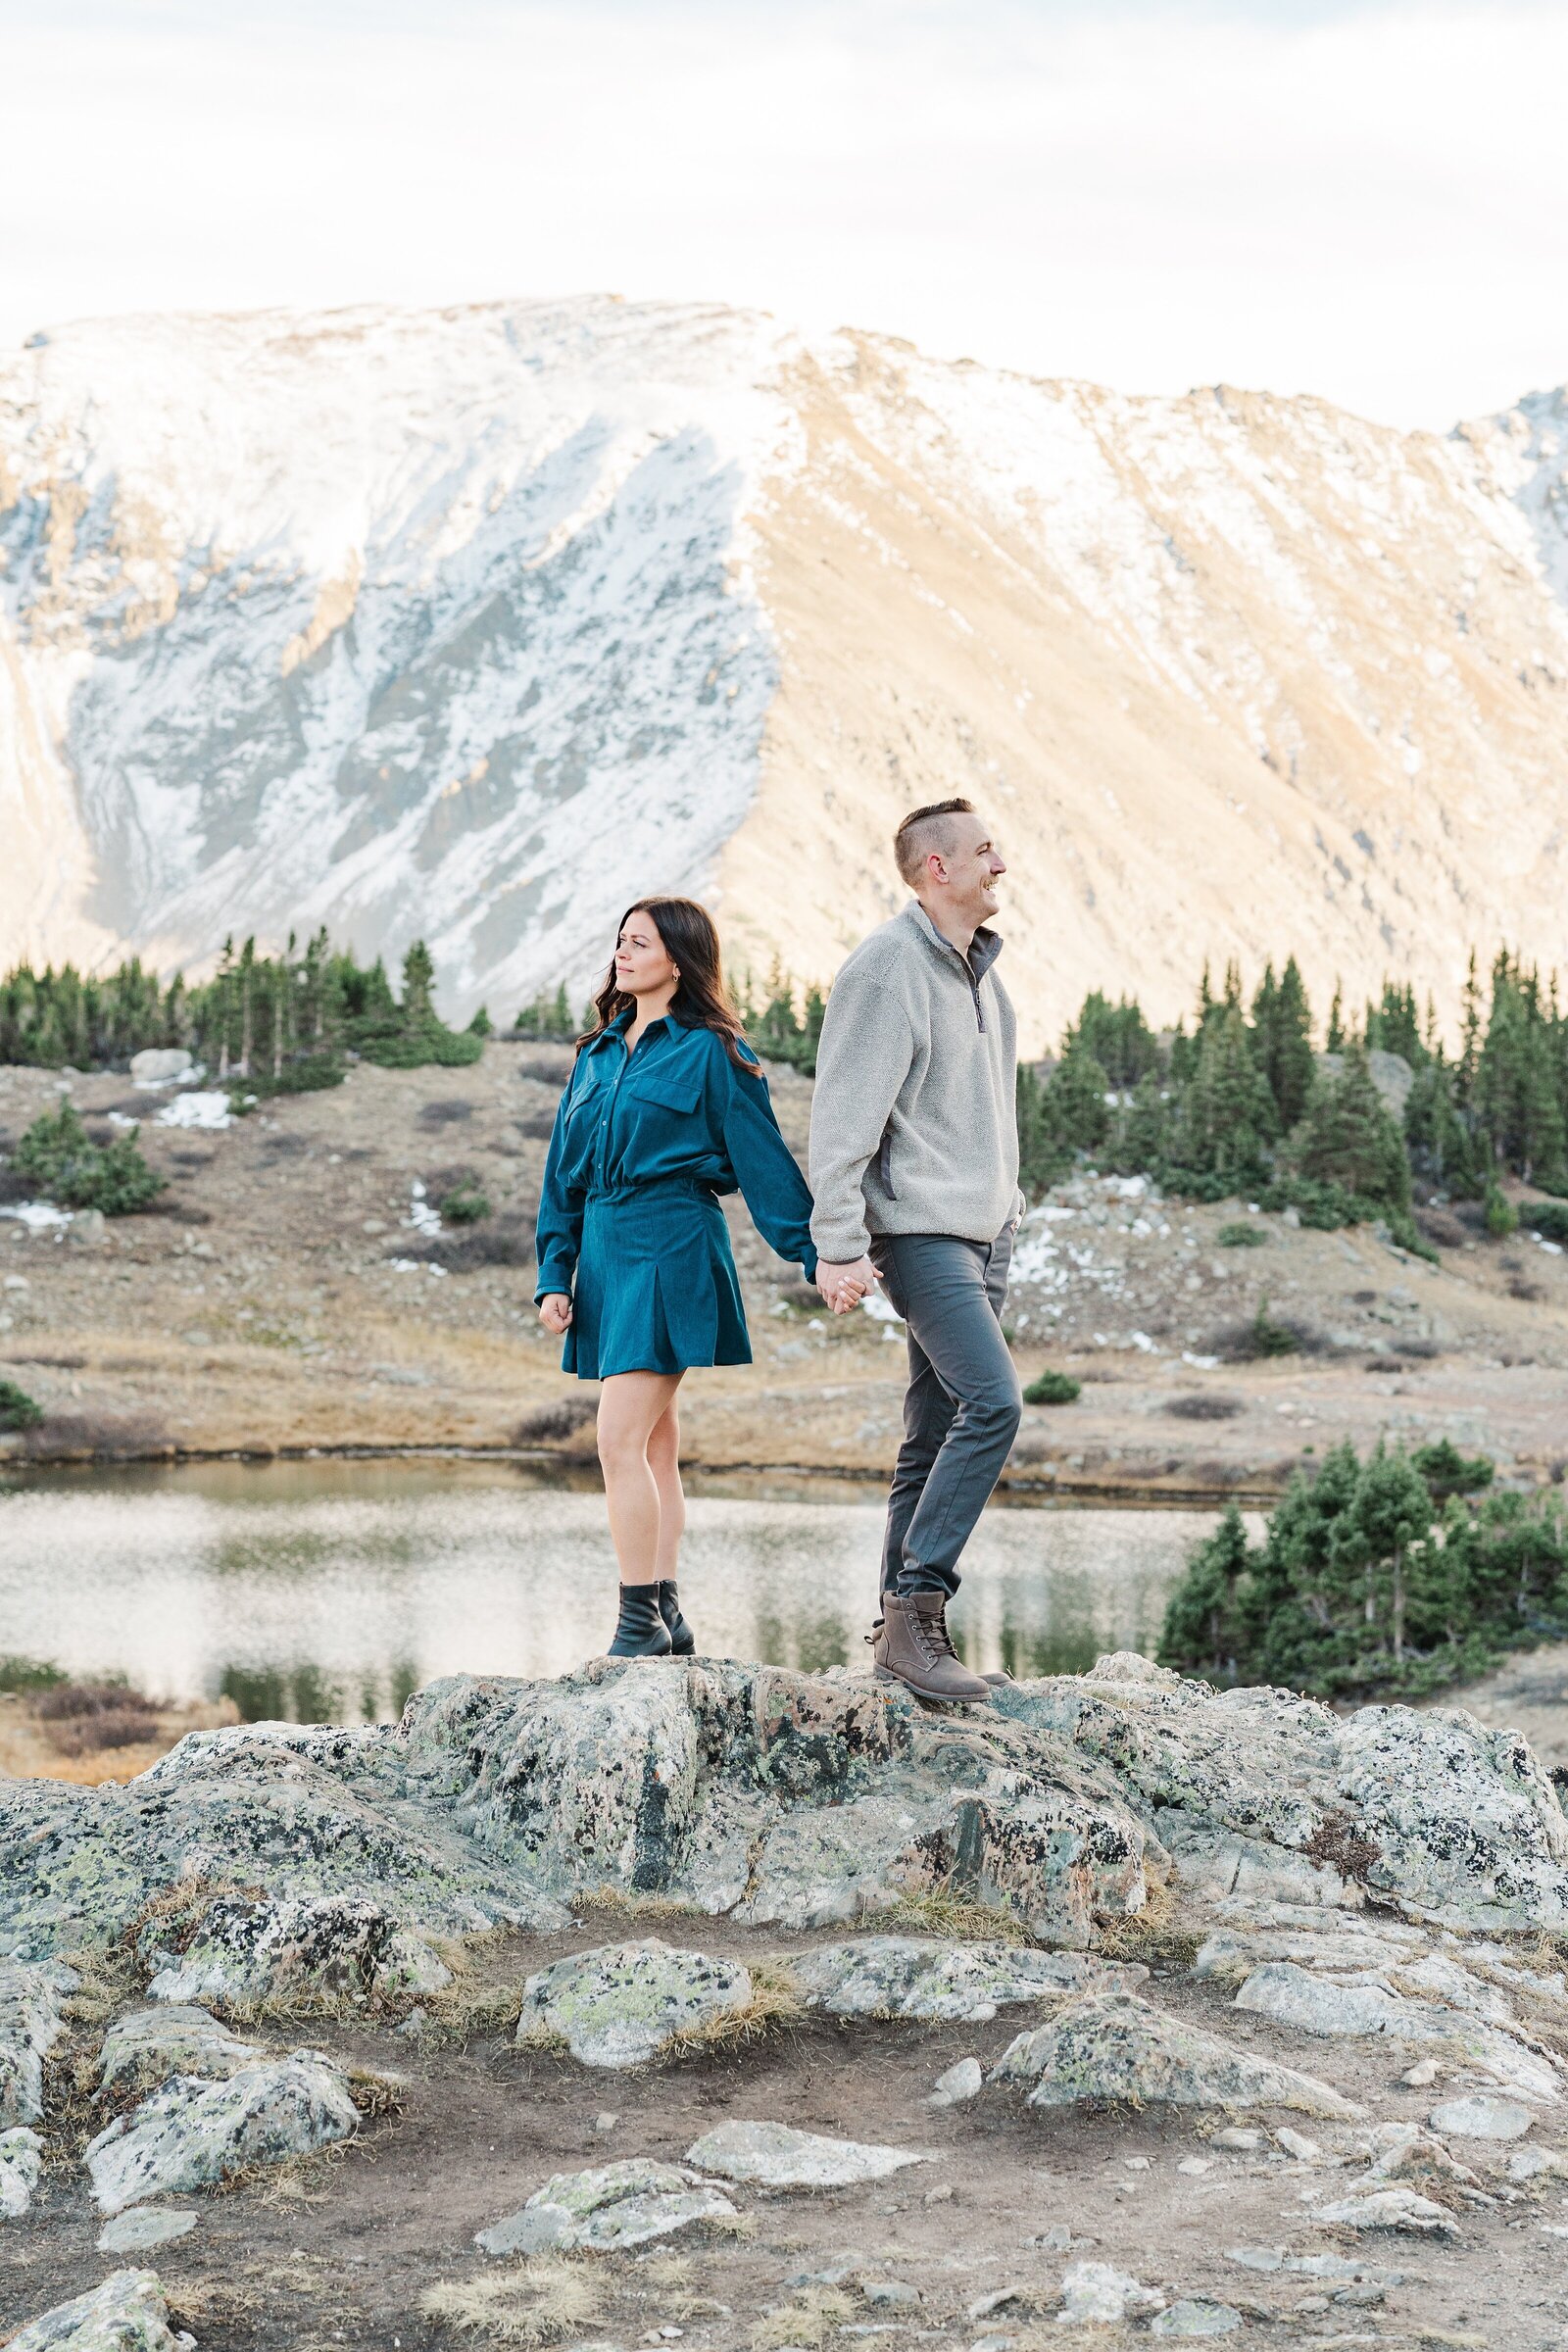 Let Samantha Immer Photography plan your stress-free and unforgettable adventure elopement in Colorado. Our signature elopement experience ensures personalized and customized planning for your special day.